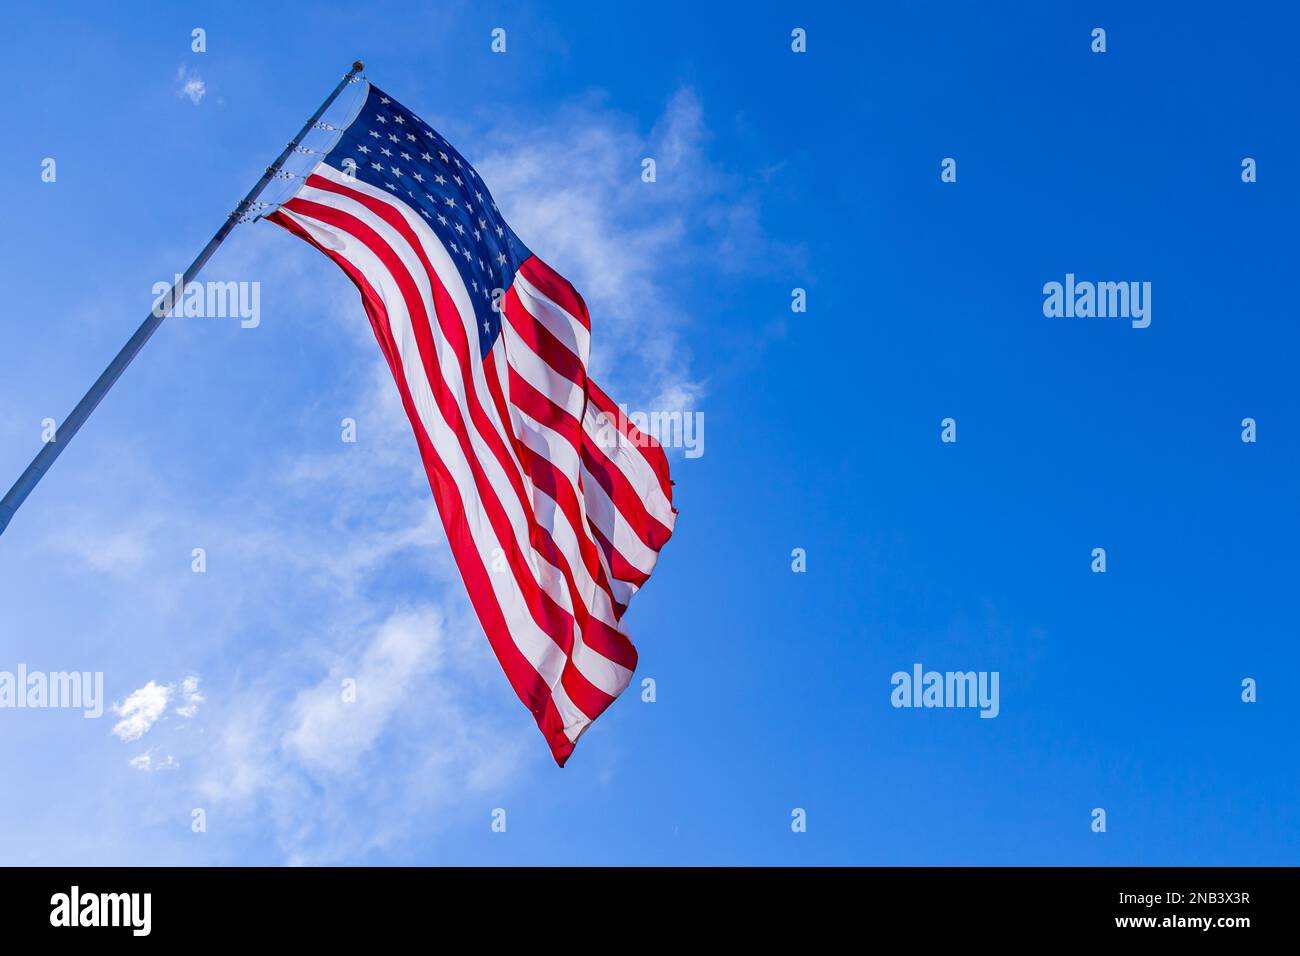 Close up of large American flag waving in front of blue sky and white cloud. American Flag waving in wind. Close up of United States flag. American Flag Waving Under A Blue Sky With Clouds. Stock Photo